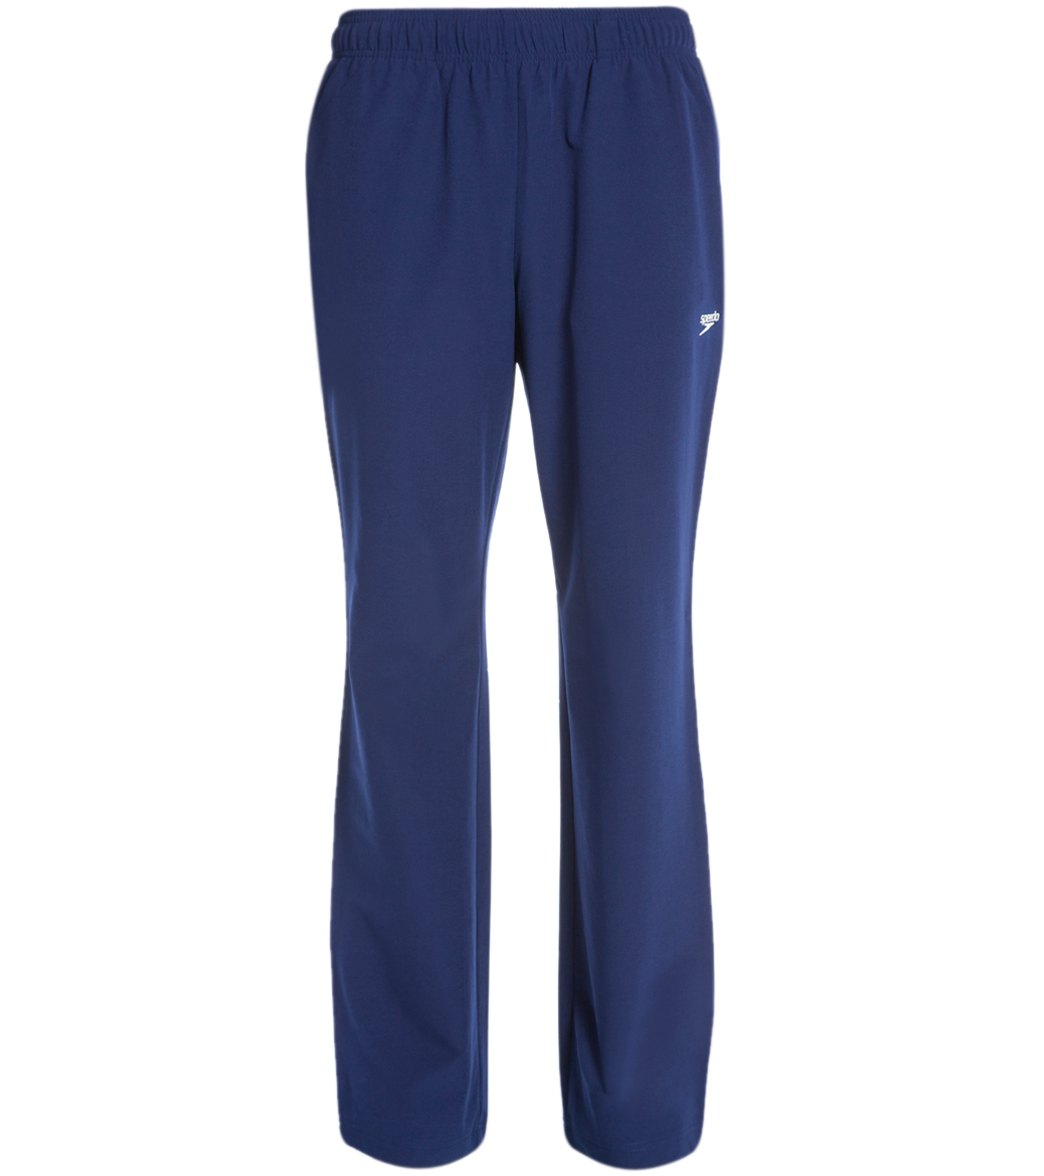 Speedo Men's Boom Force Warm Up Pant at SwimOutlet.com - Free Shipping